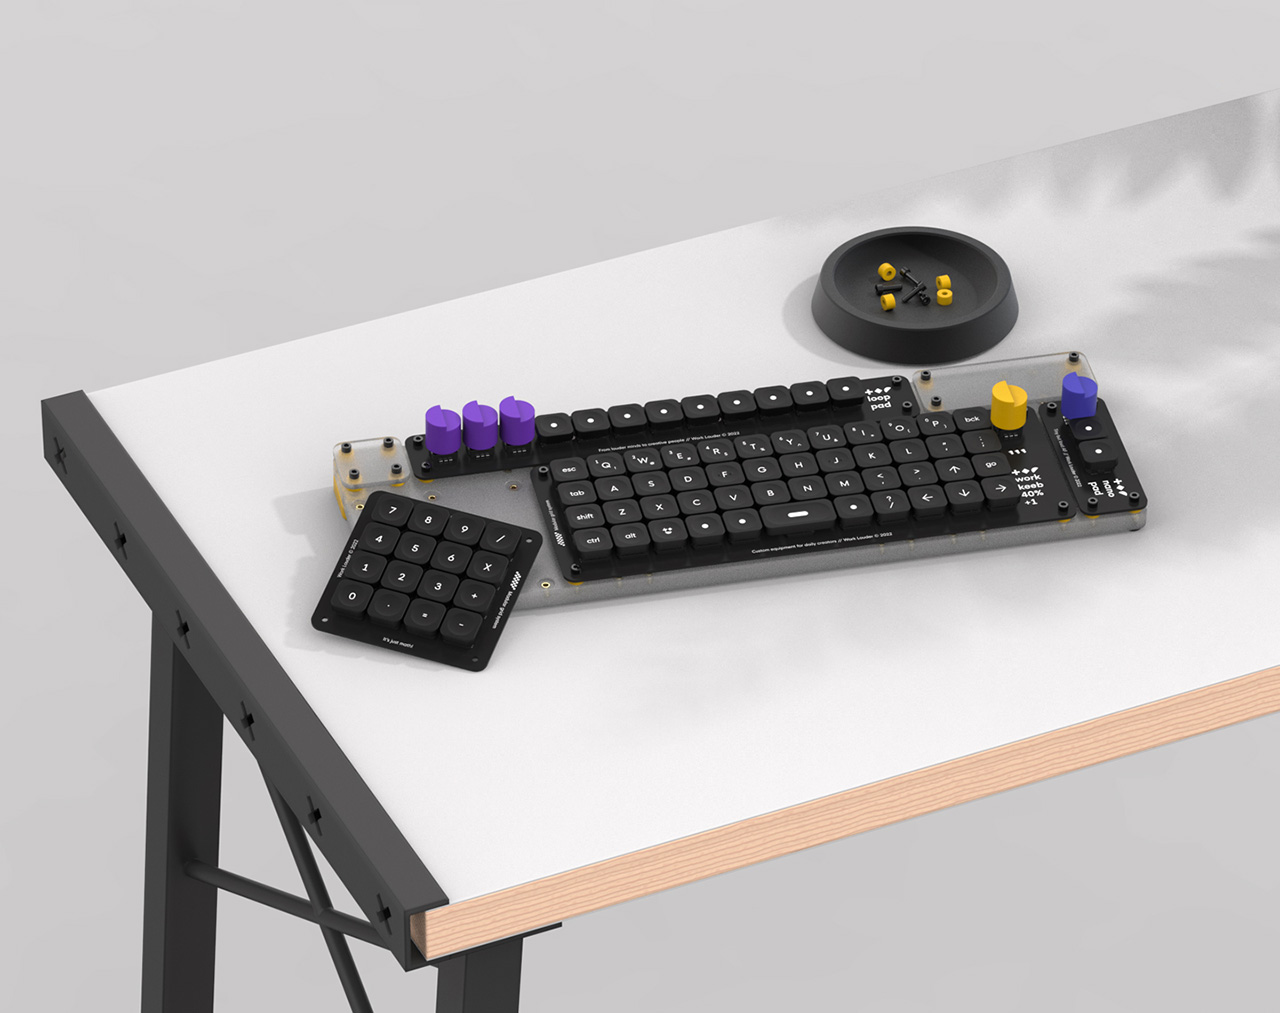 The Creator Board May Be the Ultimate Designer’s Keyboard